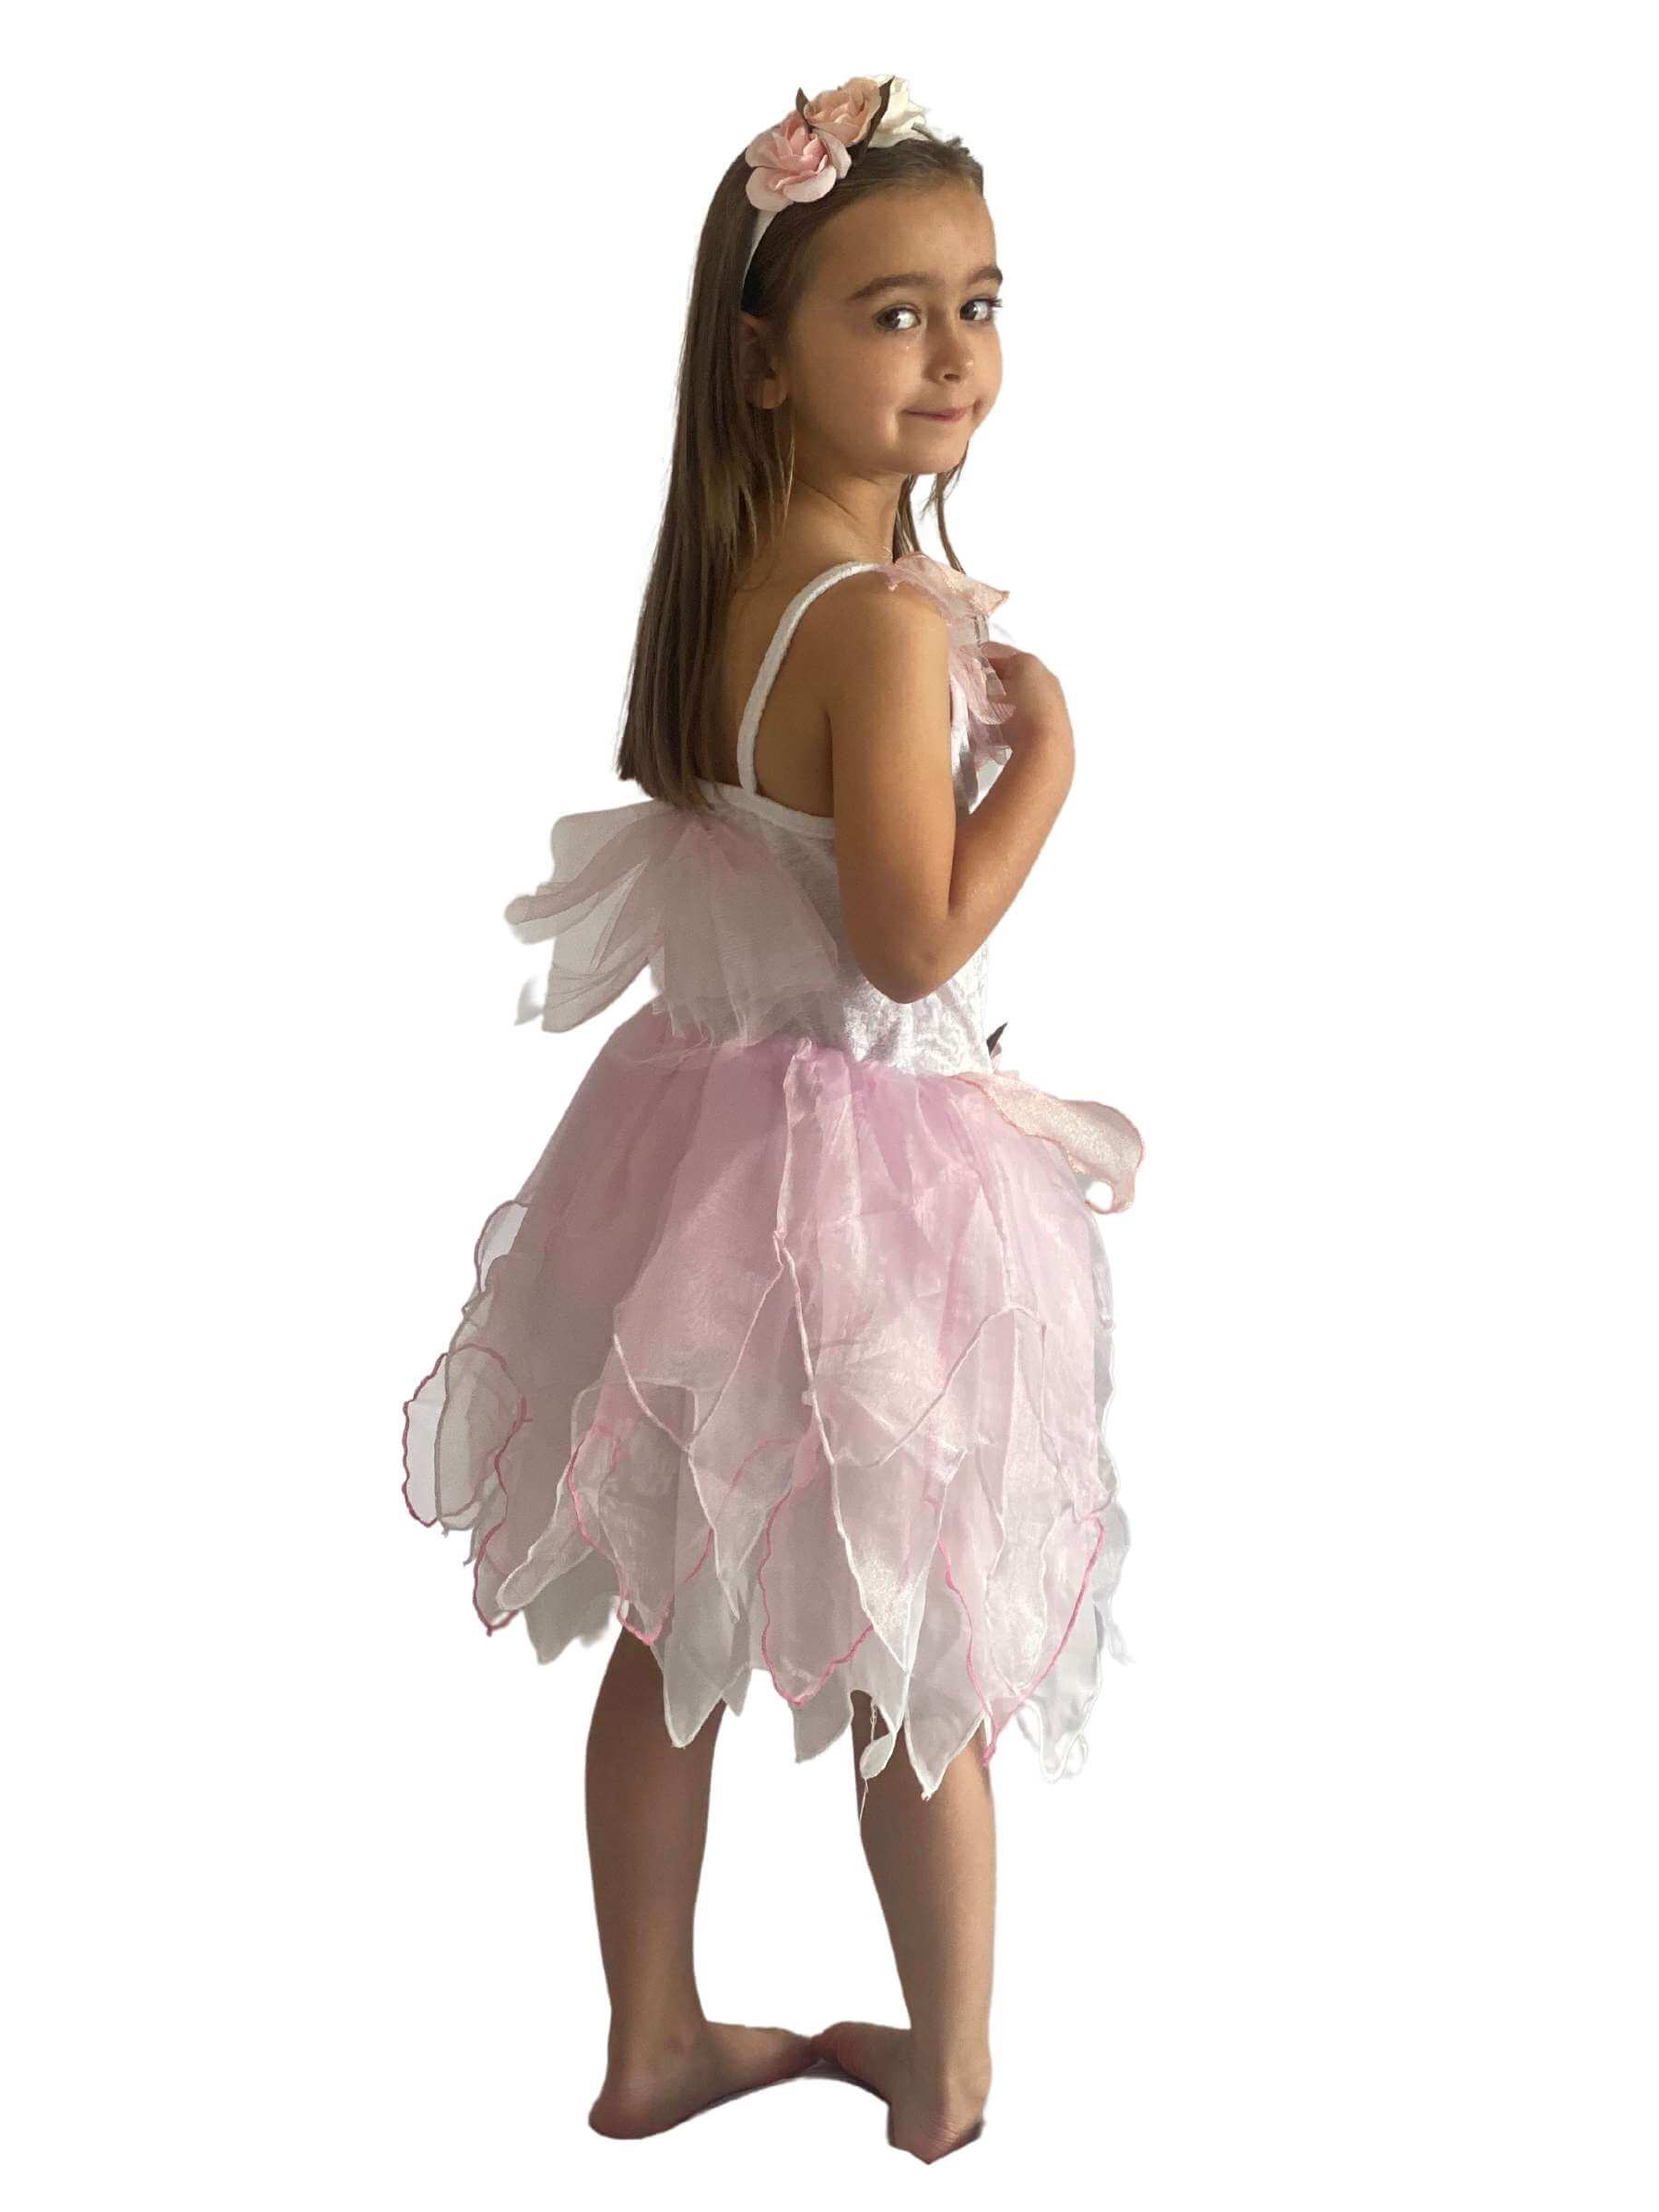 Side of the girl wearing the white and pink fairy costume showing the layered skirt and the flowers on the headband.